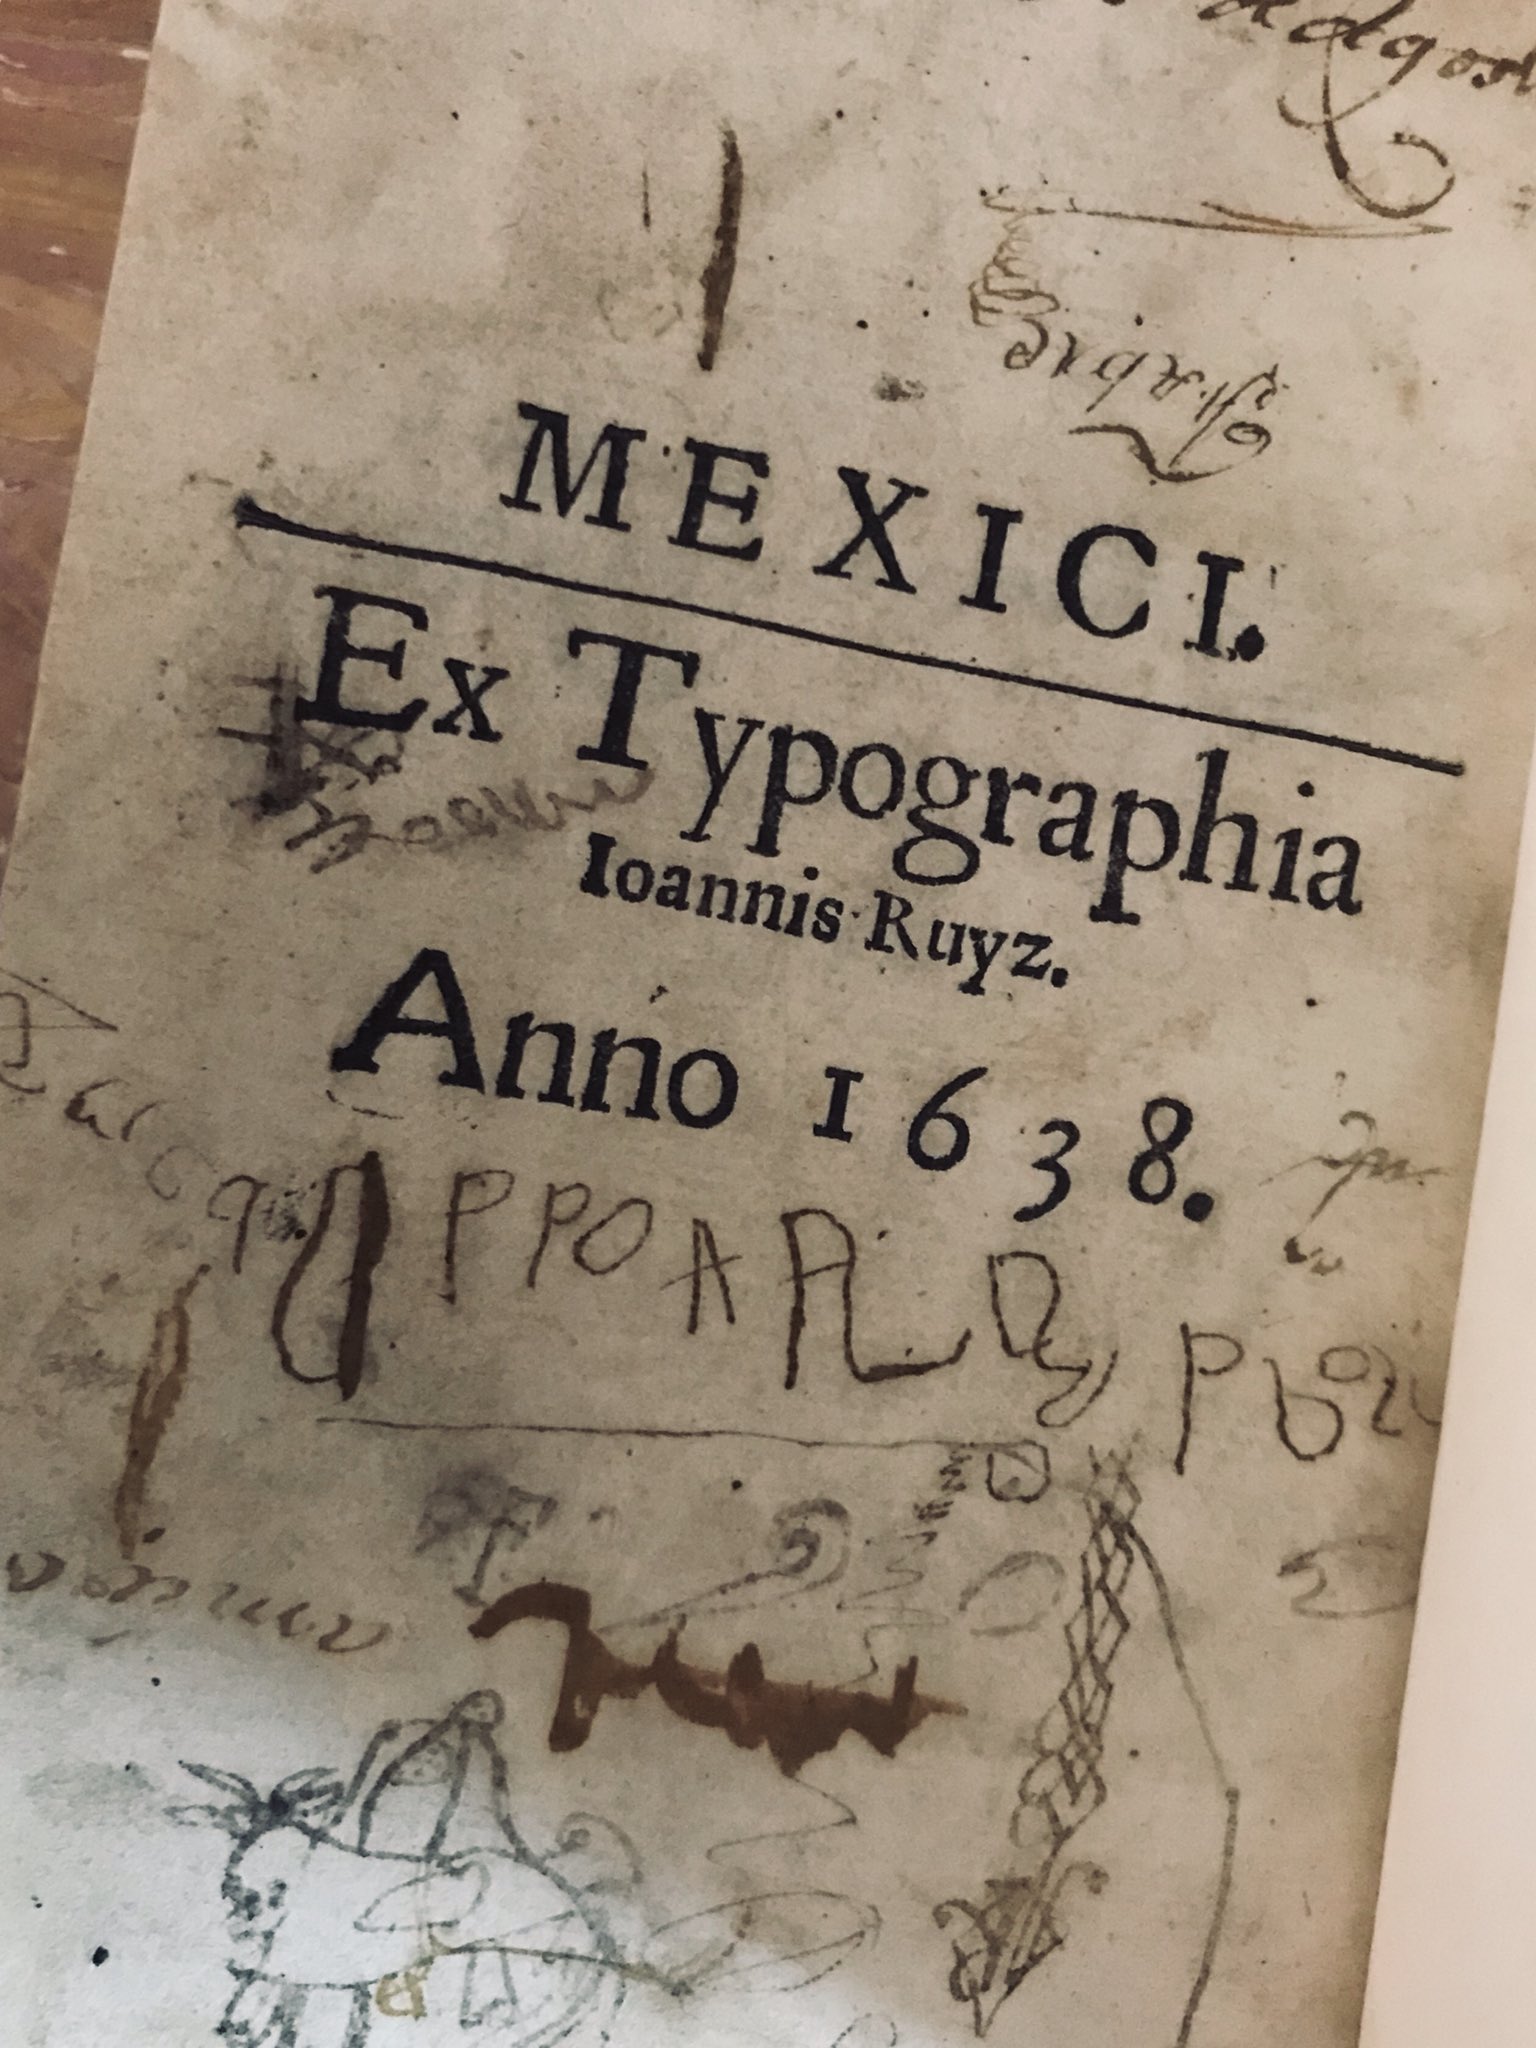 One of the most fascinating aspects of working with old books is finding doodles, drawings, and other forms of annotation and markings across their pages. Pedro de Contreras, Manual to Administer the Holy Sacraments (Mexico City, 1638).